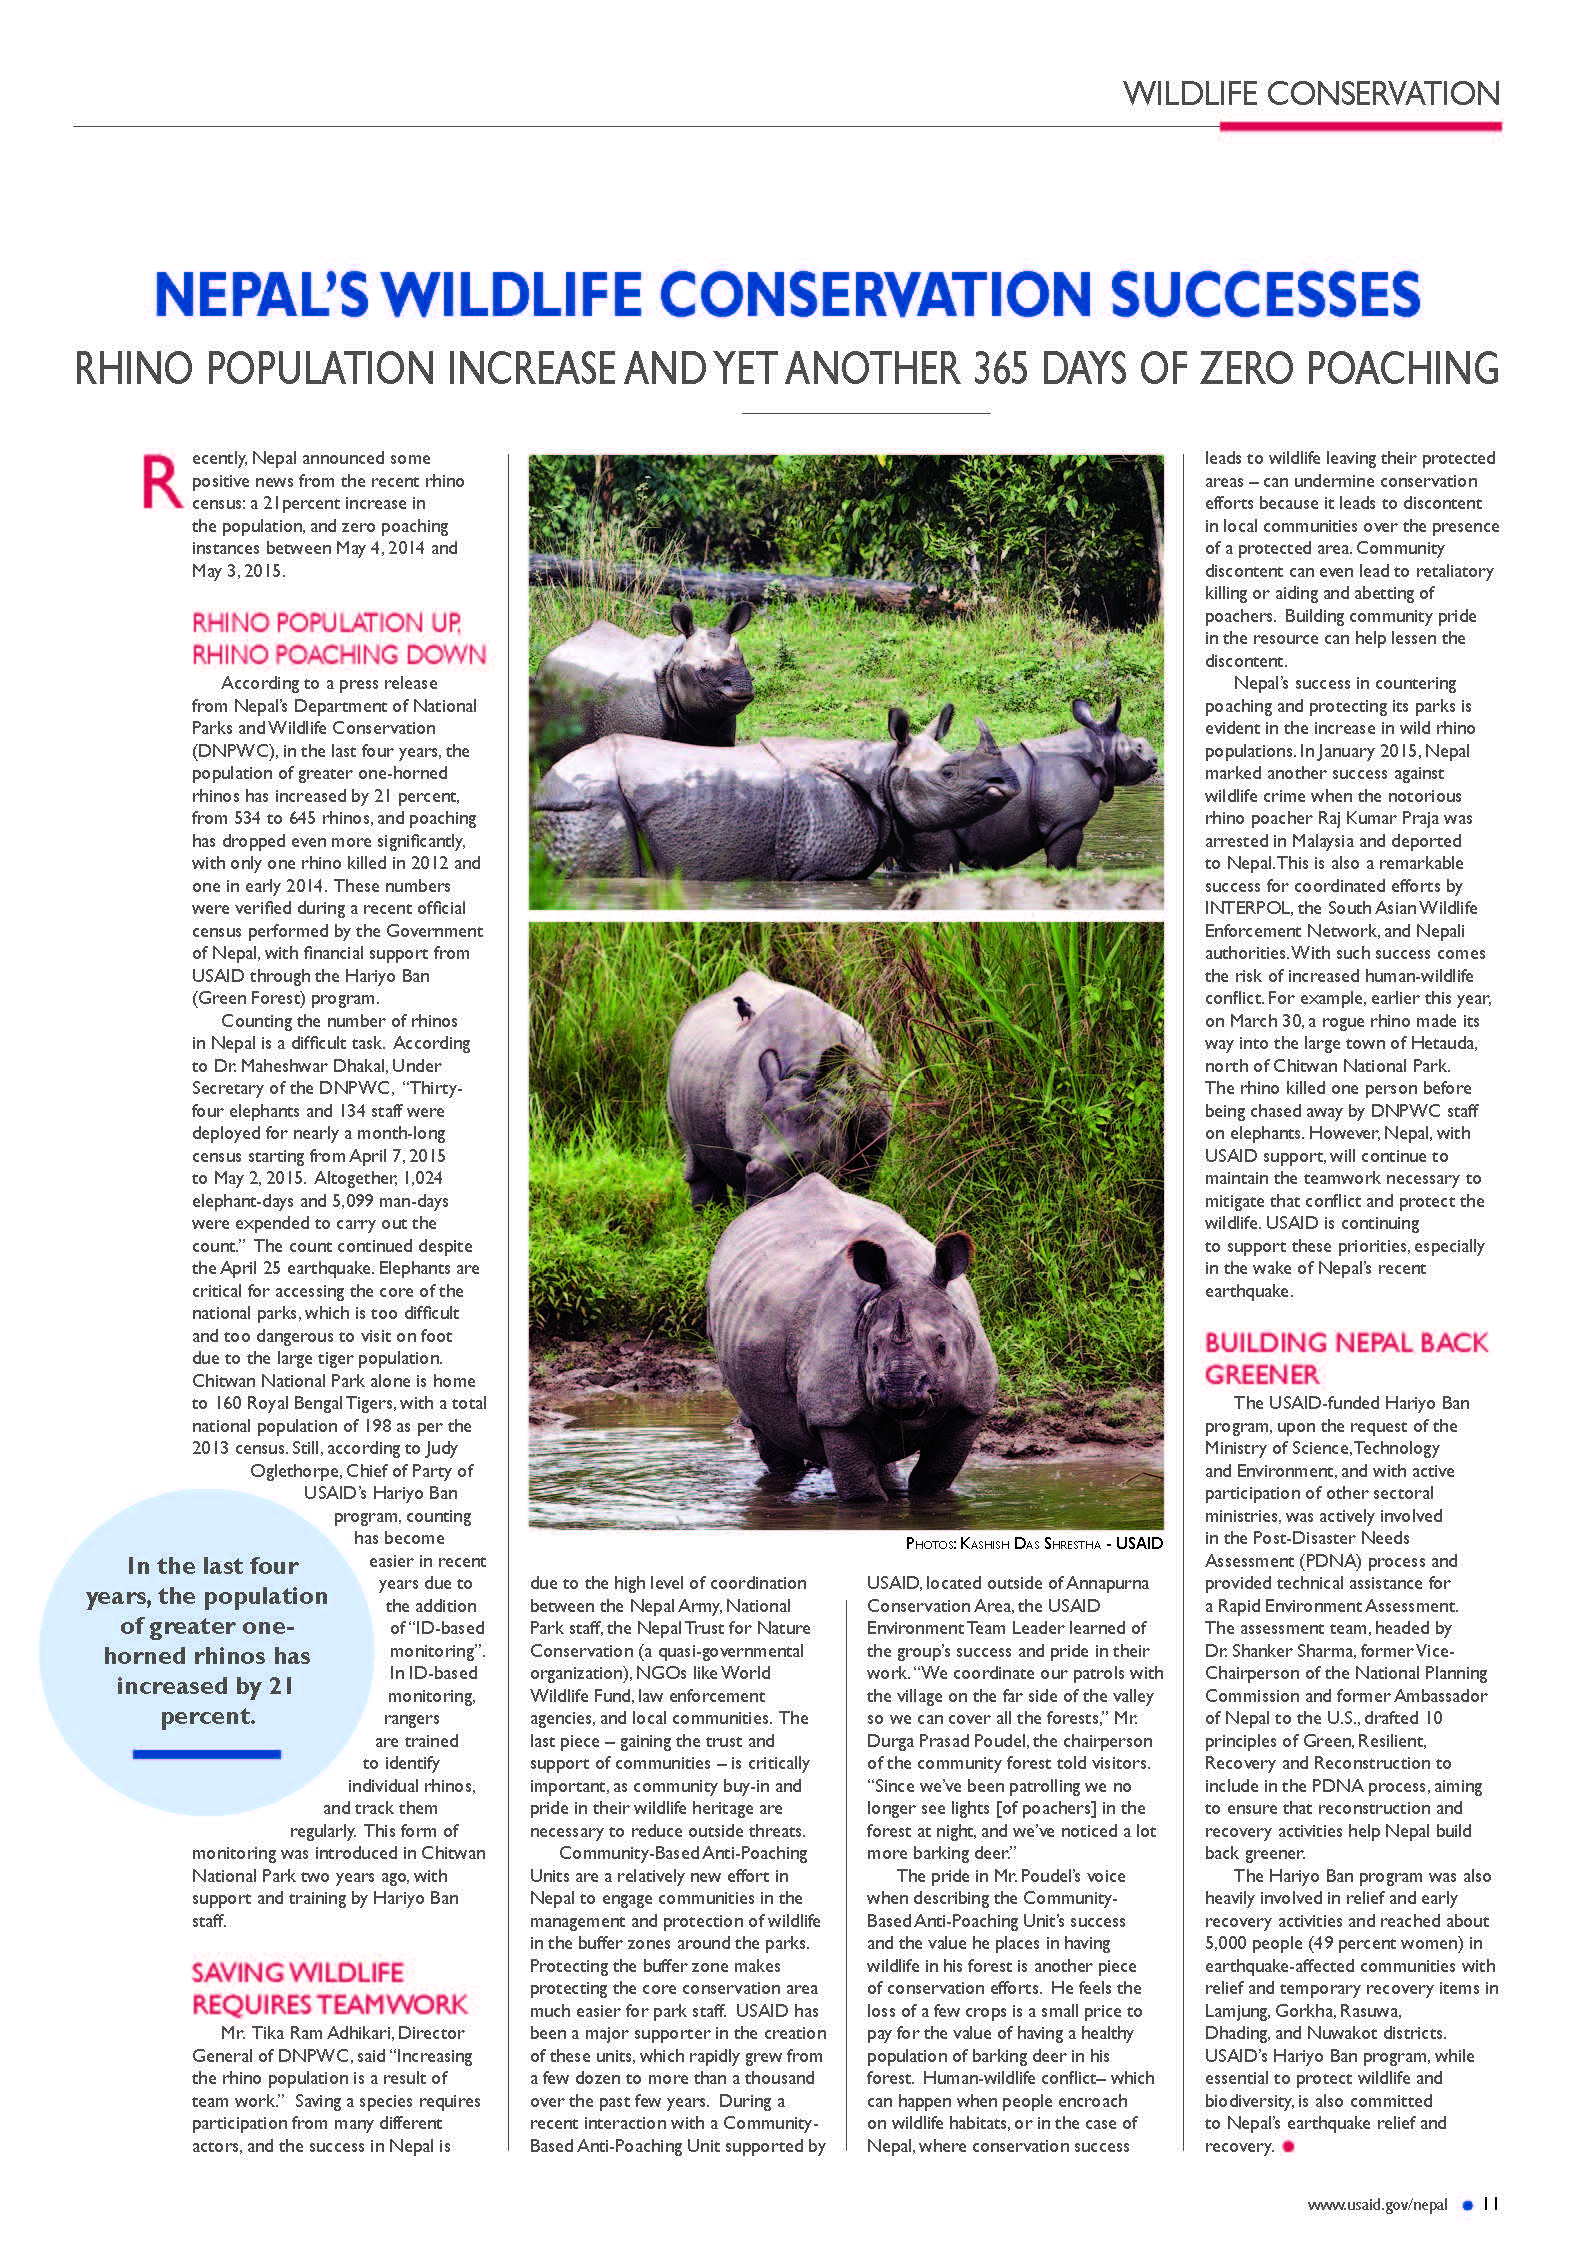 NEPAL’S WILDLIFE CONSERVATION SUCCESSES: RHINO POPULATION INCREASE AND YET ANOTHER 365 DAYS OF ZERO POACHING